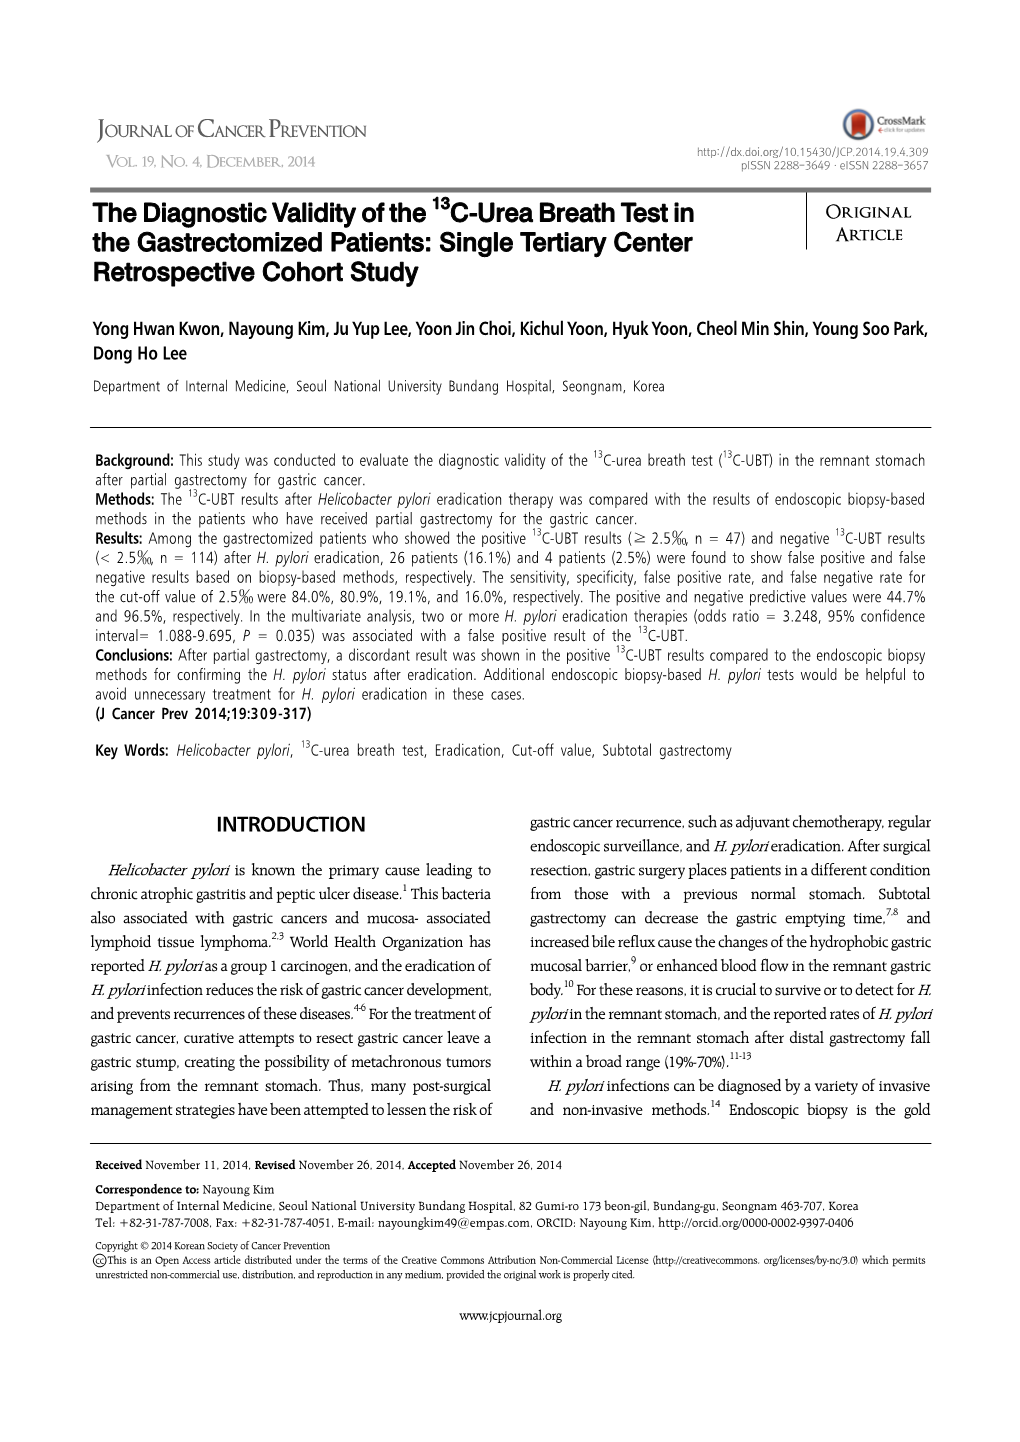 The Diagnostic Validity of the 13C-Urea Breath Test in Original the Gastrectomized Patients: Single Tertiary Center Article Retrospective Cohort Study